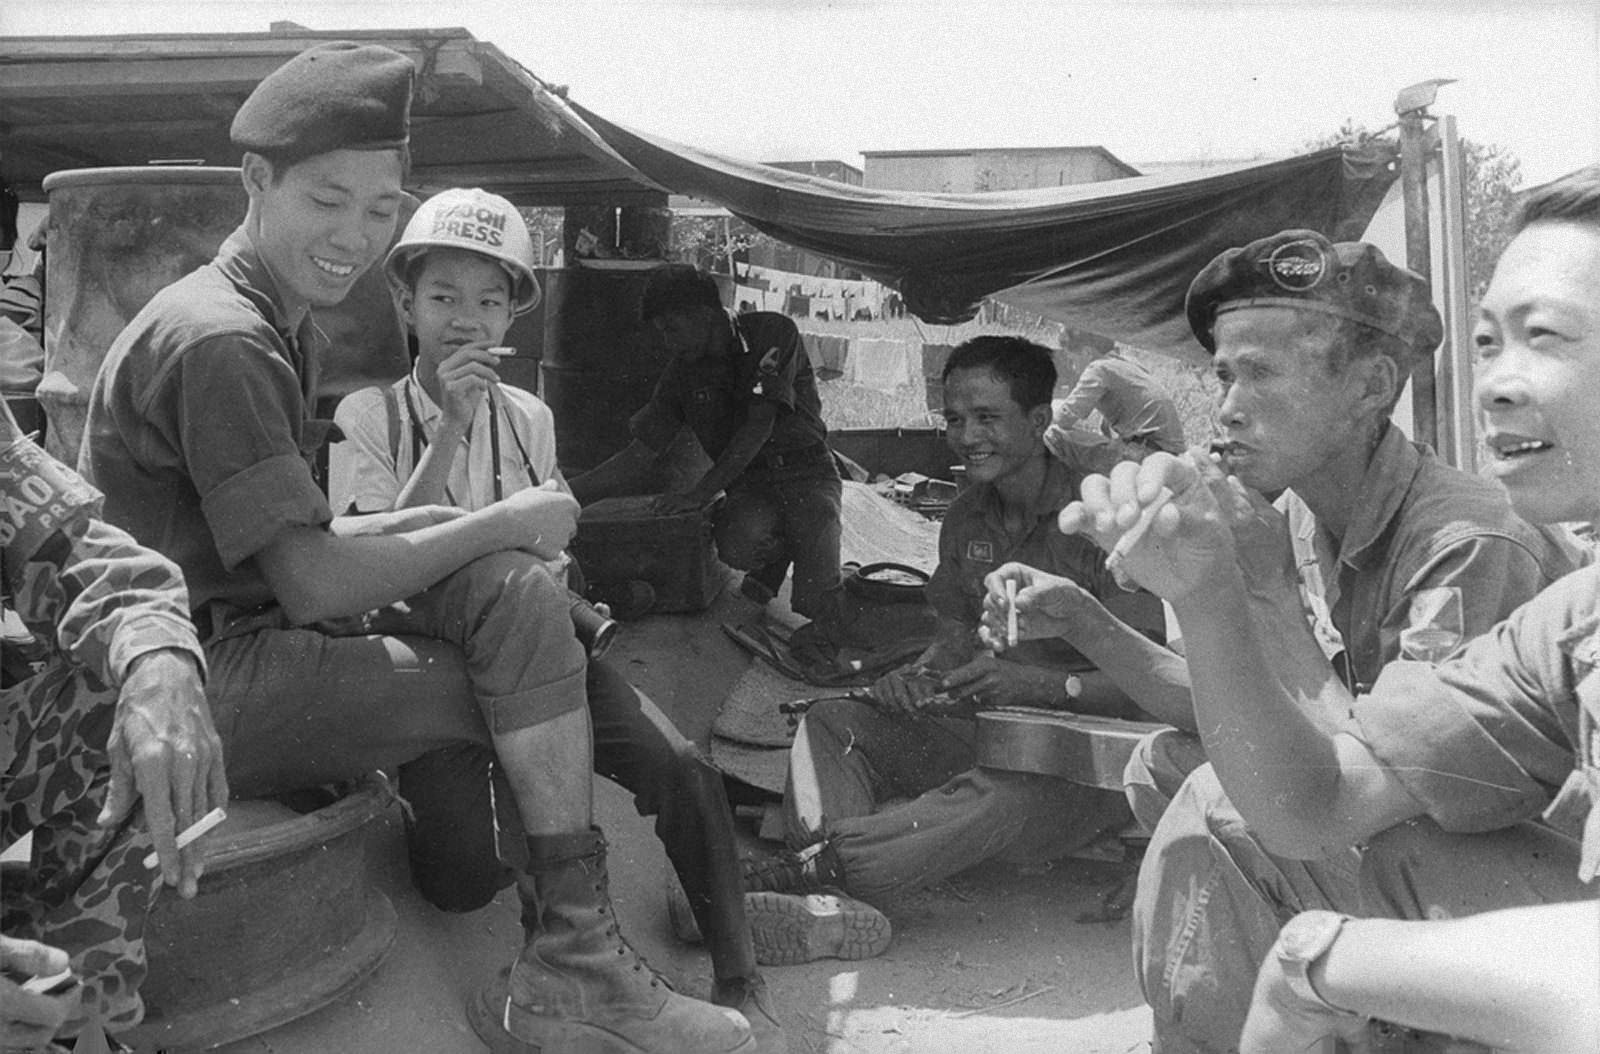 Lo Manh Hung: The Youngest Photo Journalist Of The Vietnam War, 1968